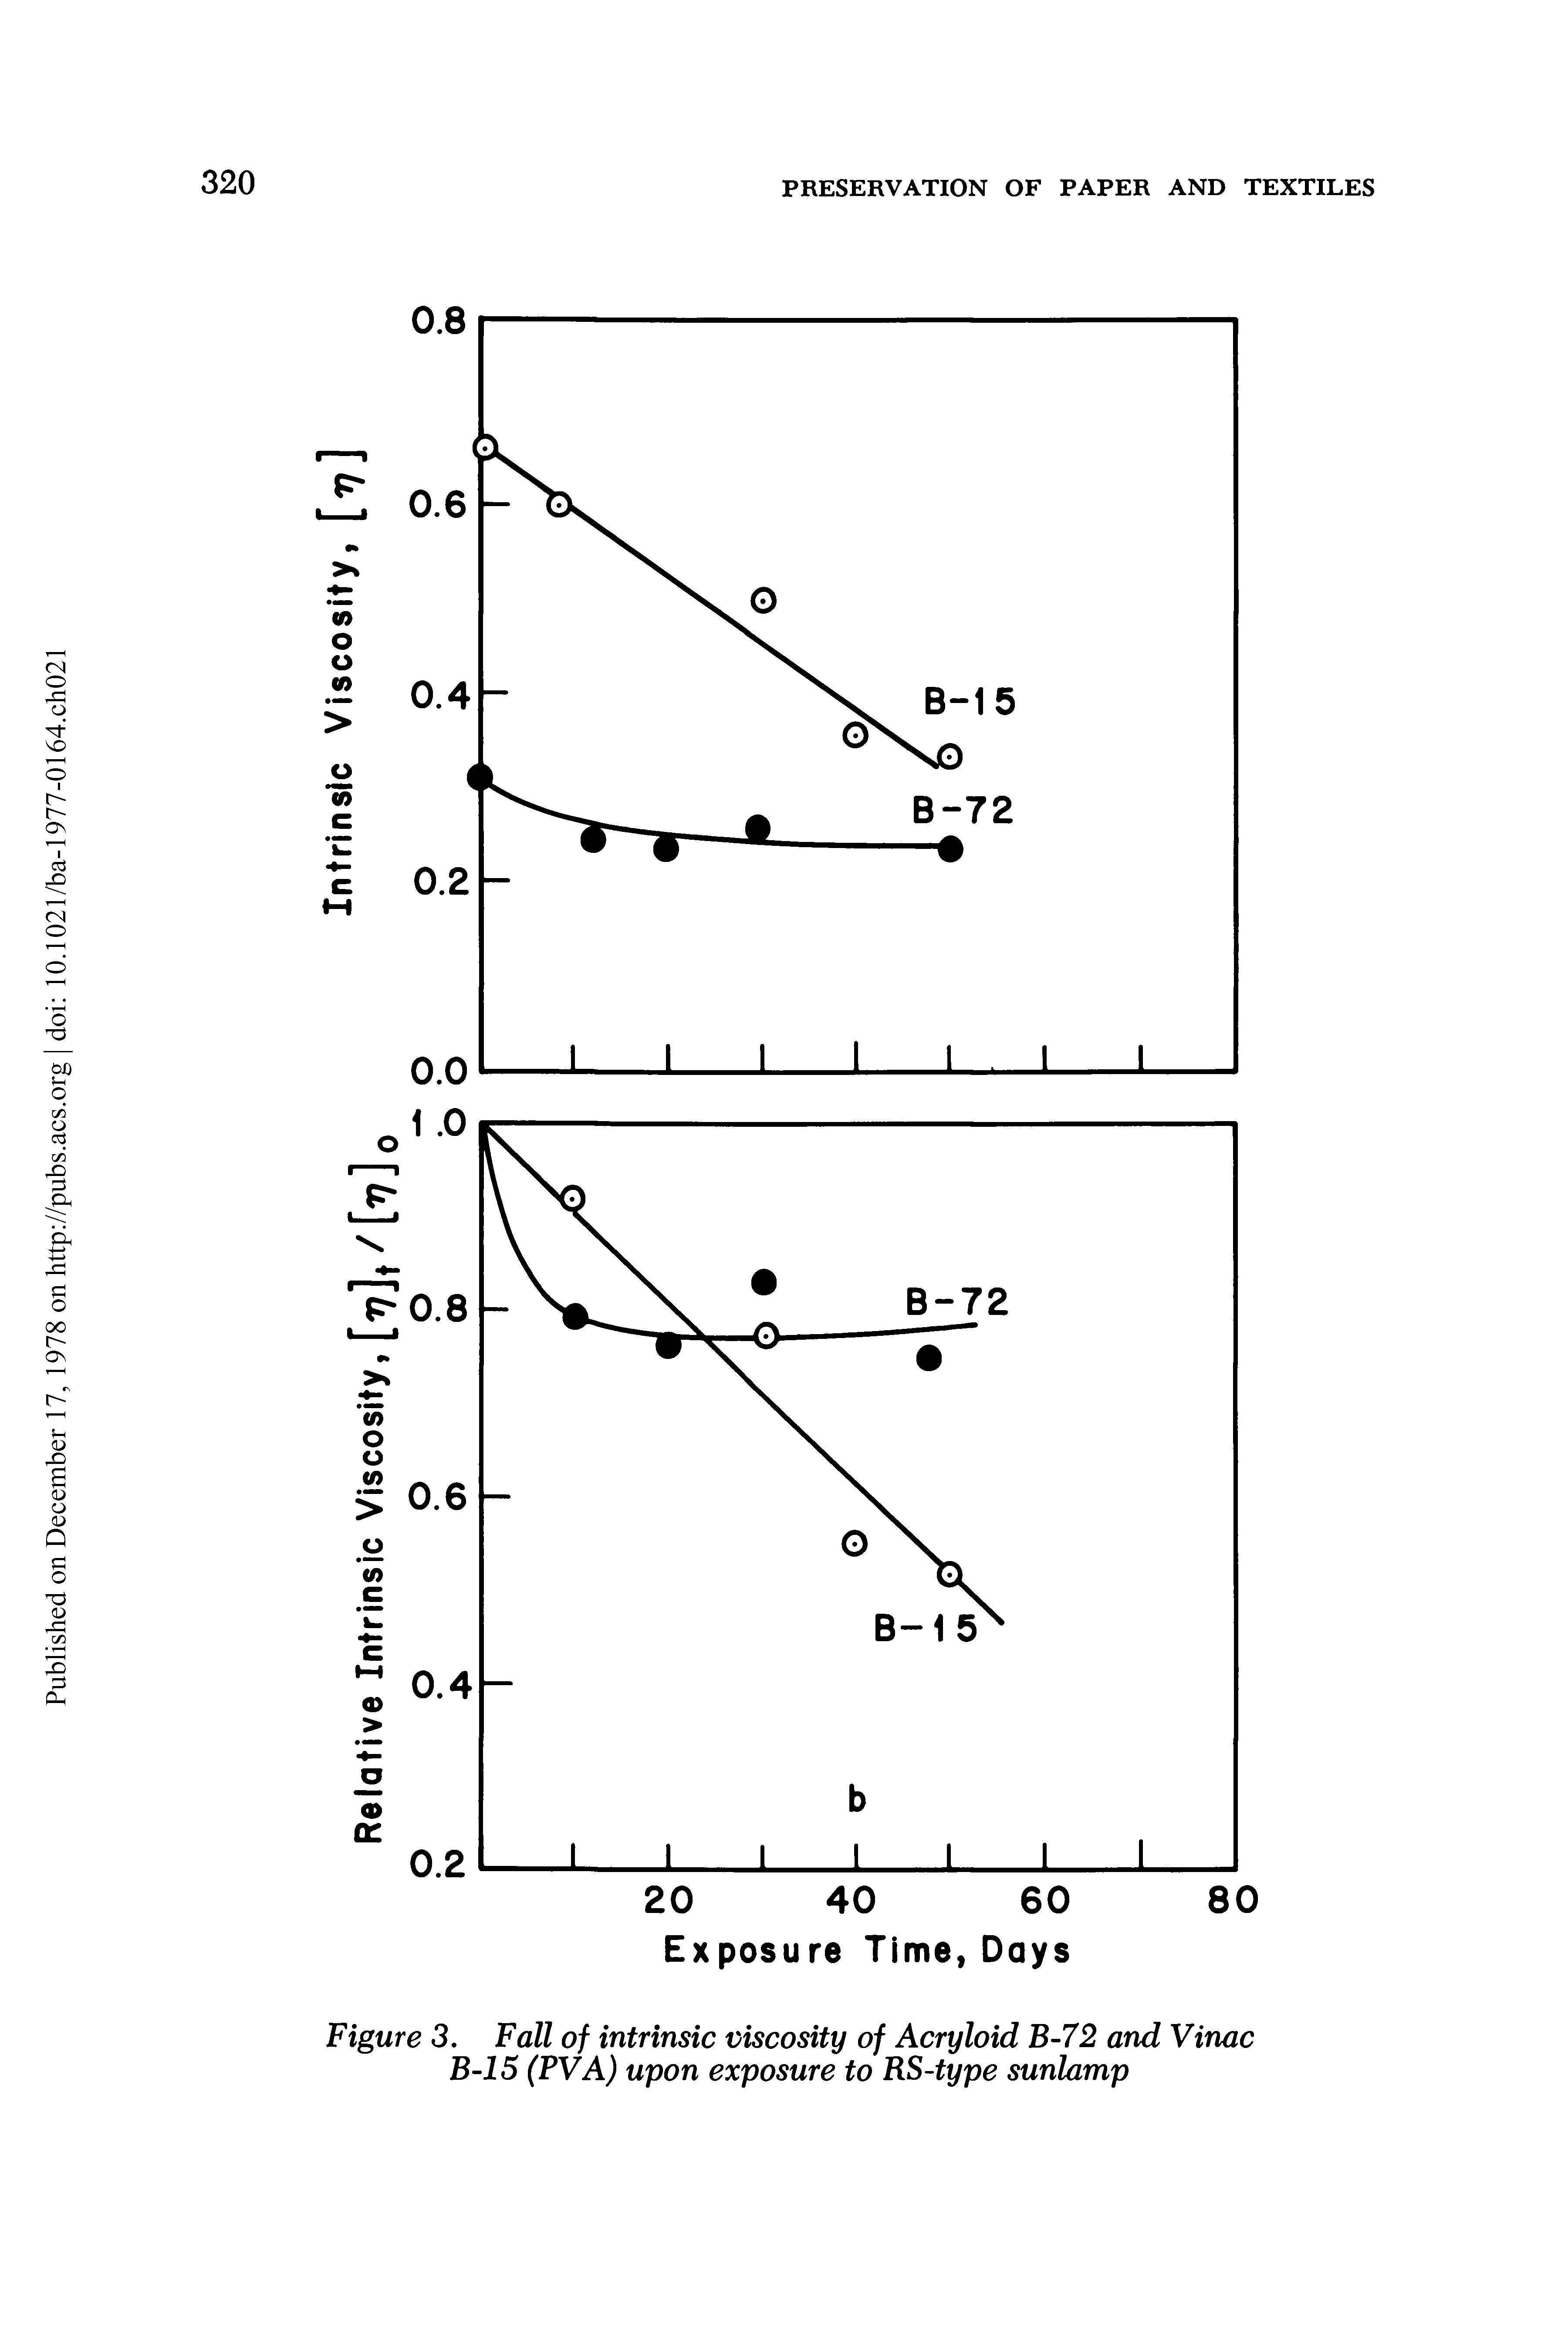 Figure 3. Fall of intrinsic viscosity of Acryloid B-72 and Vinac B-15 (PVA) upon exposure to RS-type sunlamp...